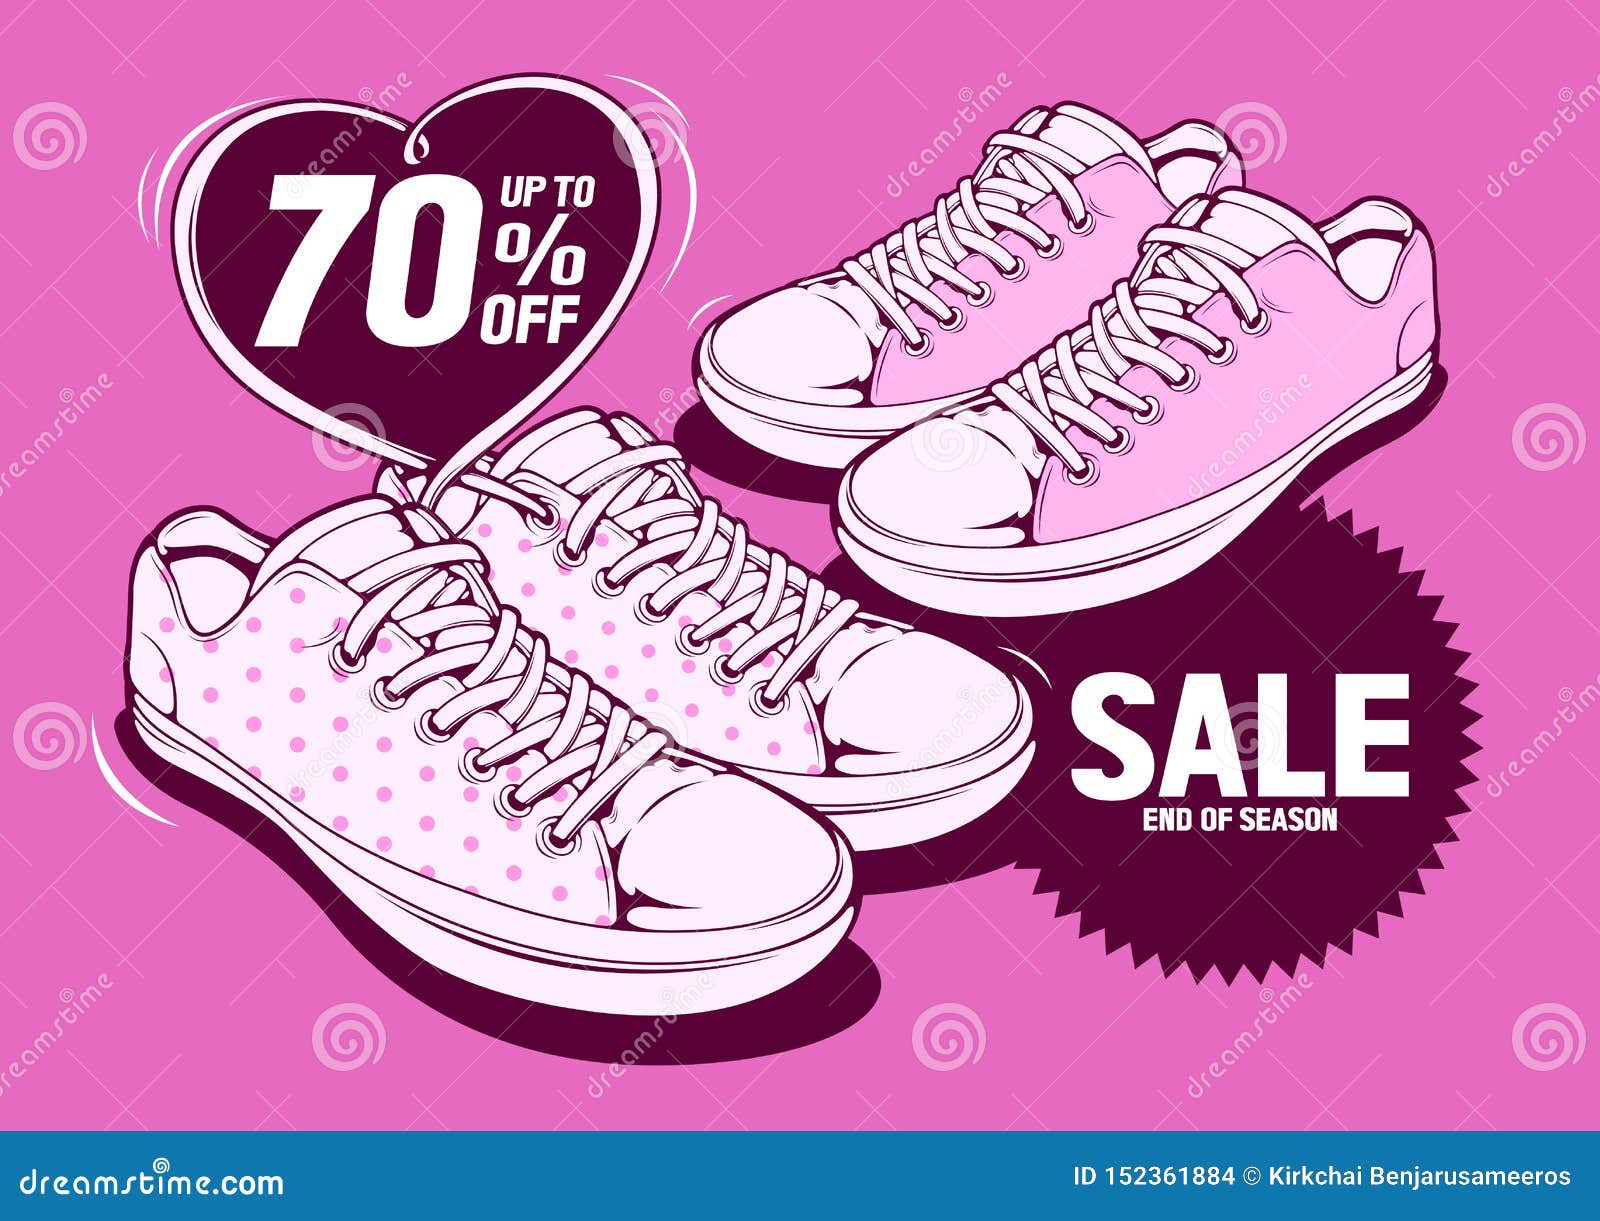 Shoes Sale stock vector. Illustration of object, cracked